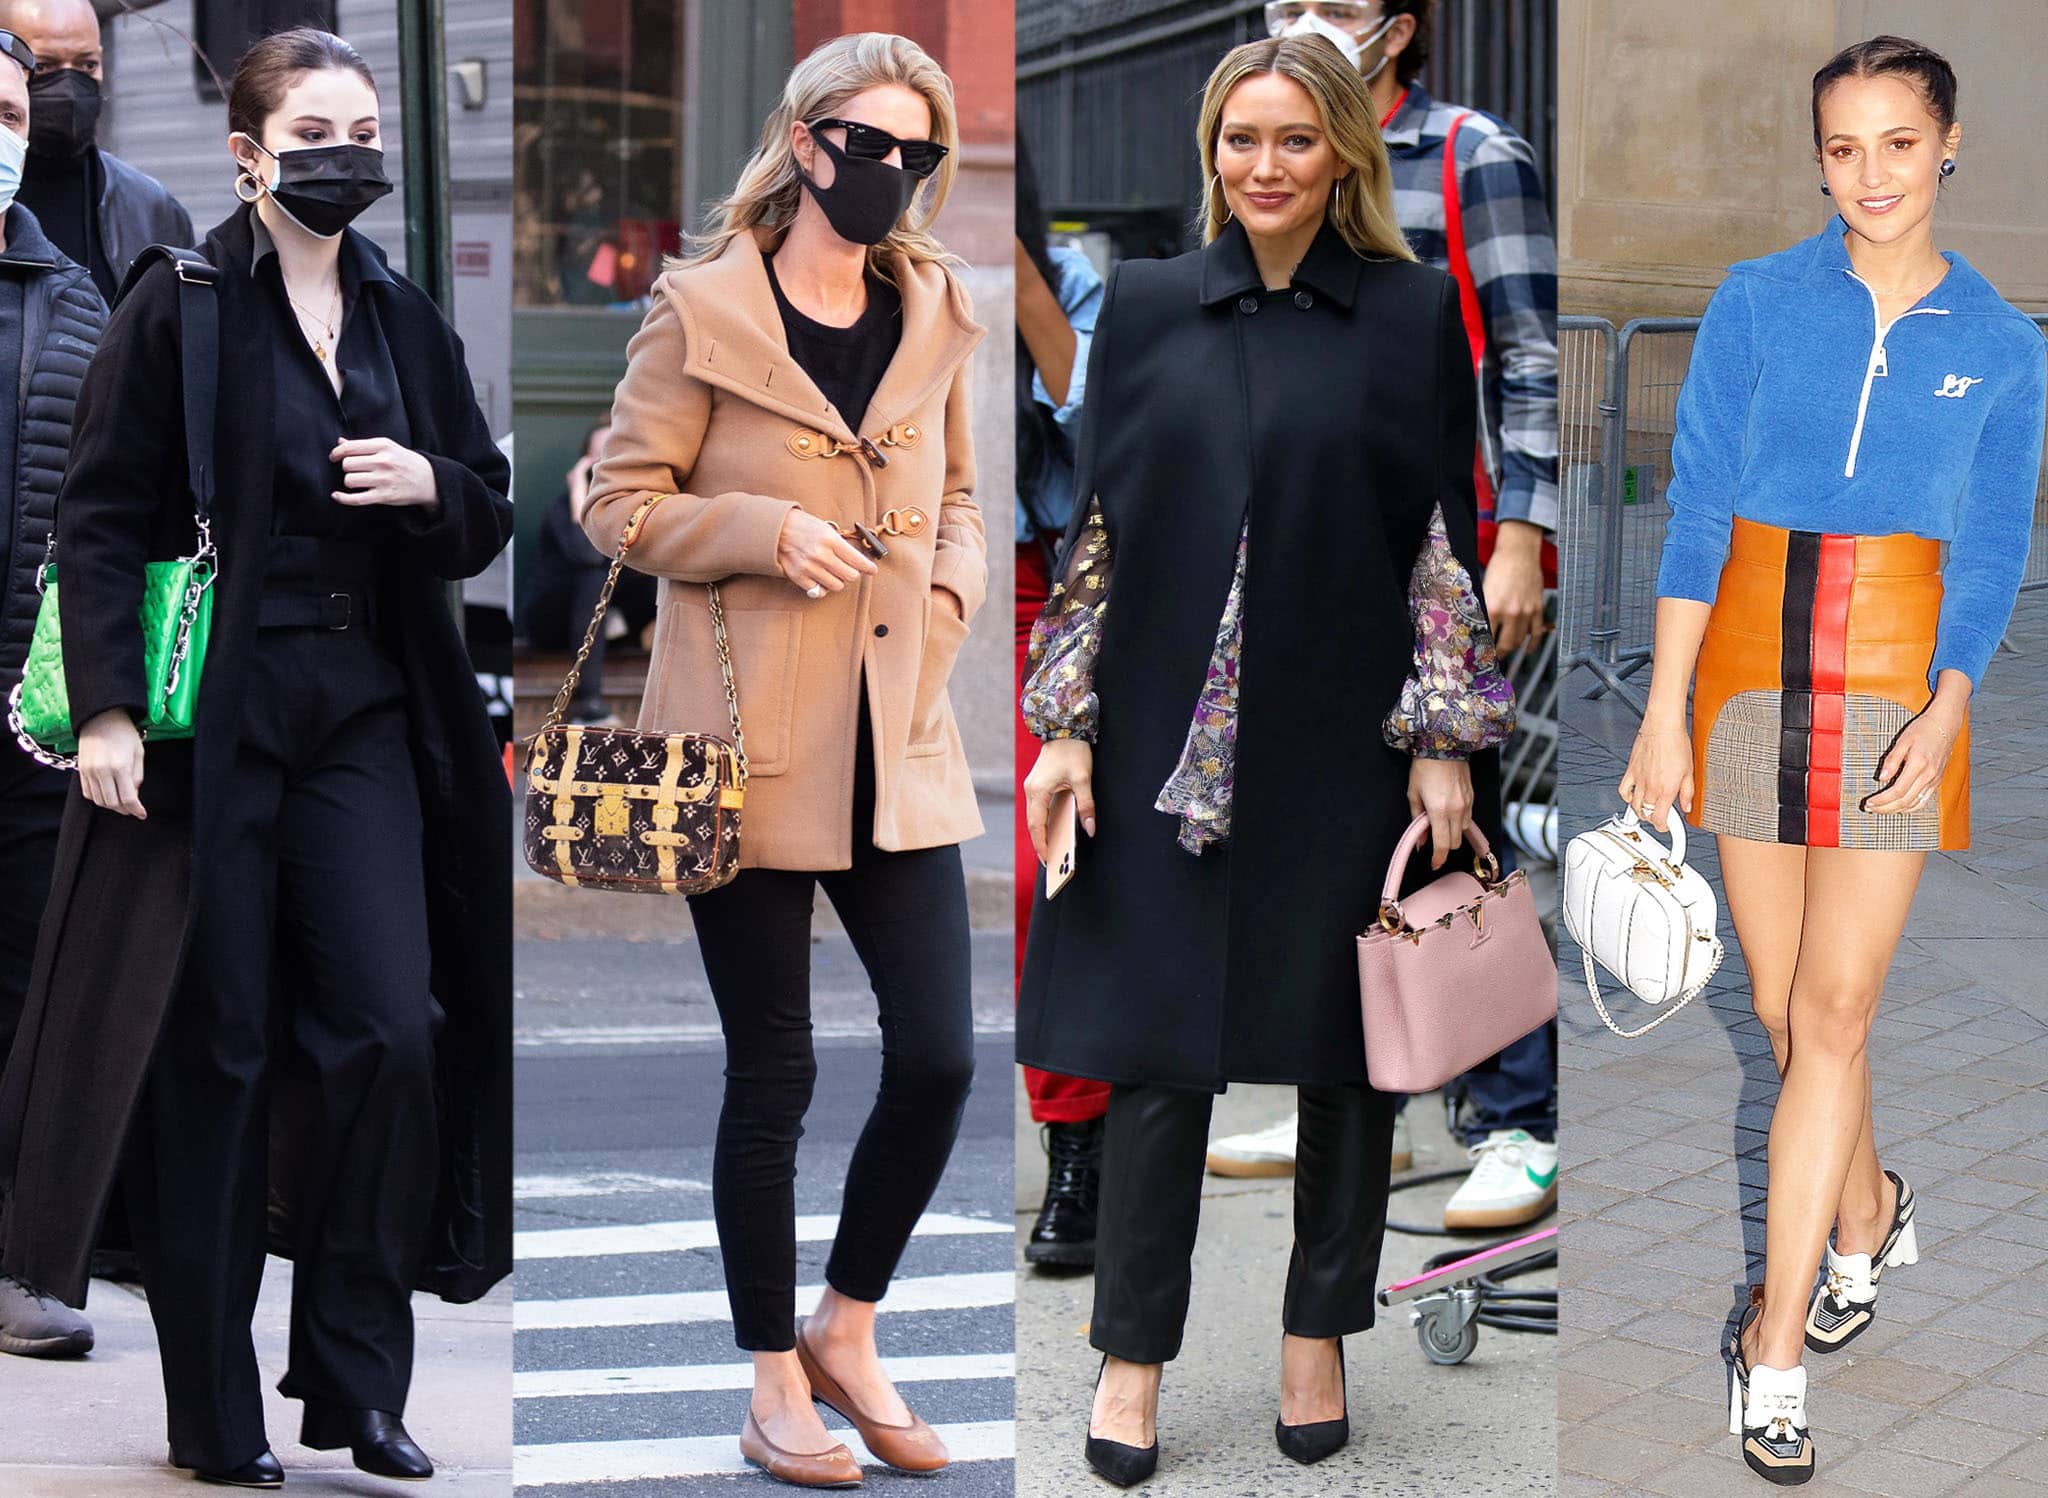 Selena Gomez, Nicky Hilton, Hilary Duff, and Alicia Vikander carrying Louis Vuitton bags